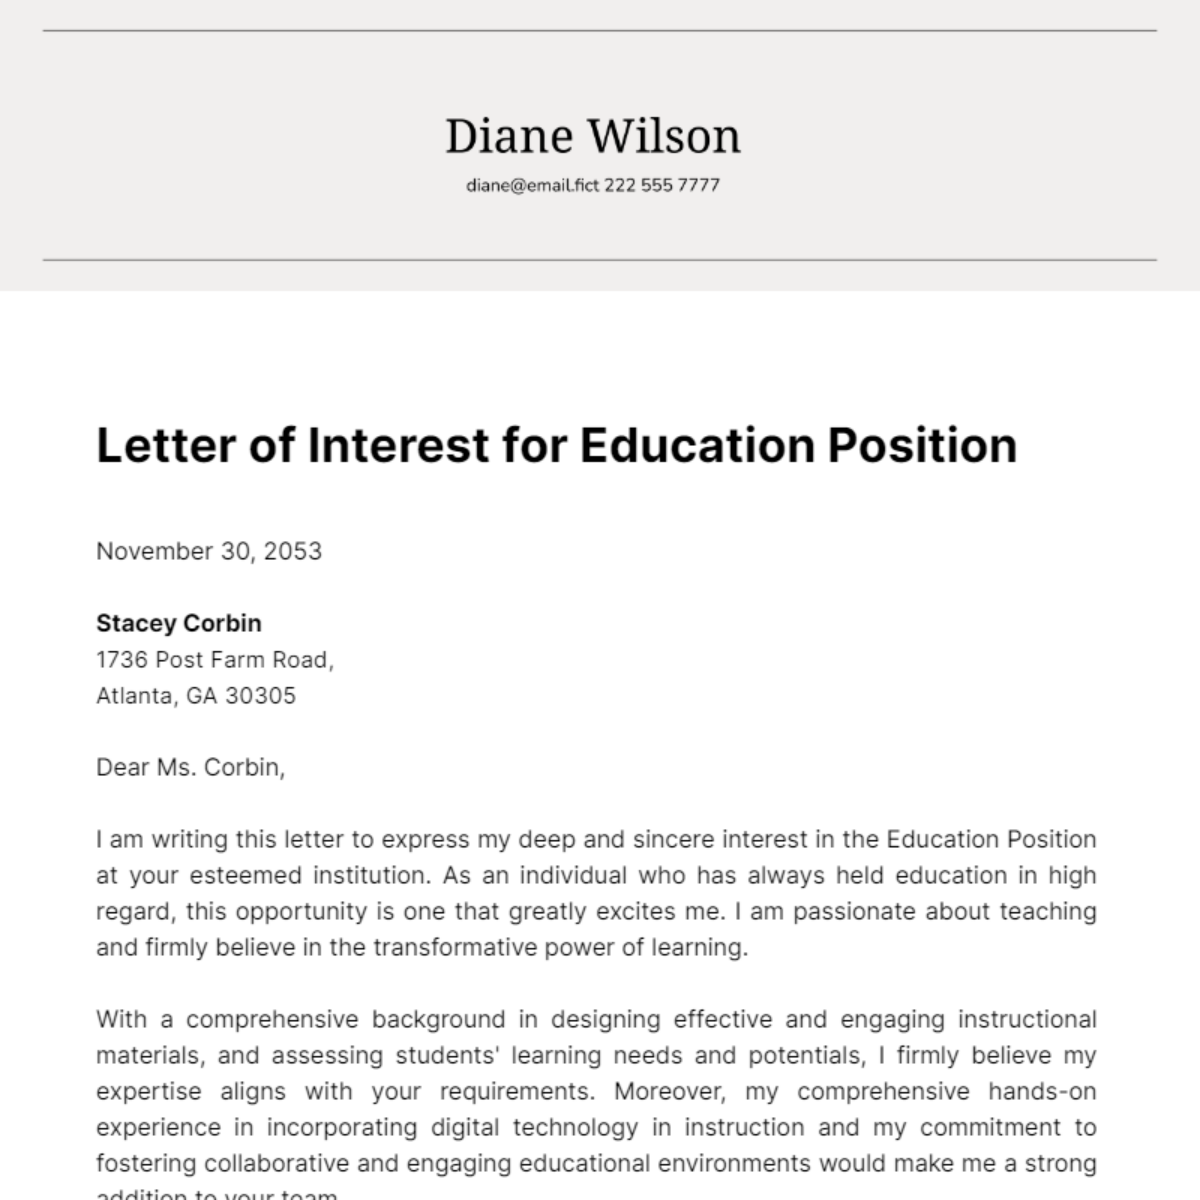 Letter of Interest for Education Position Template